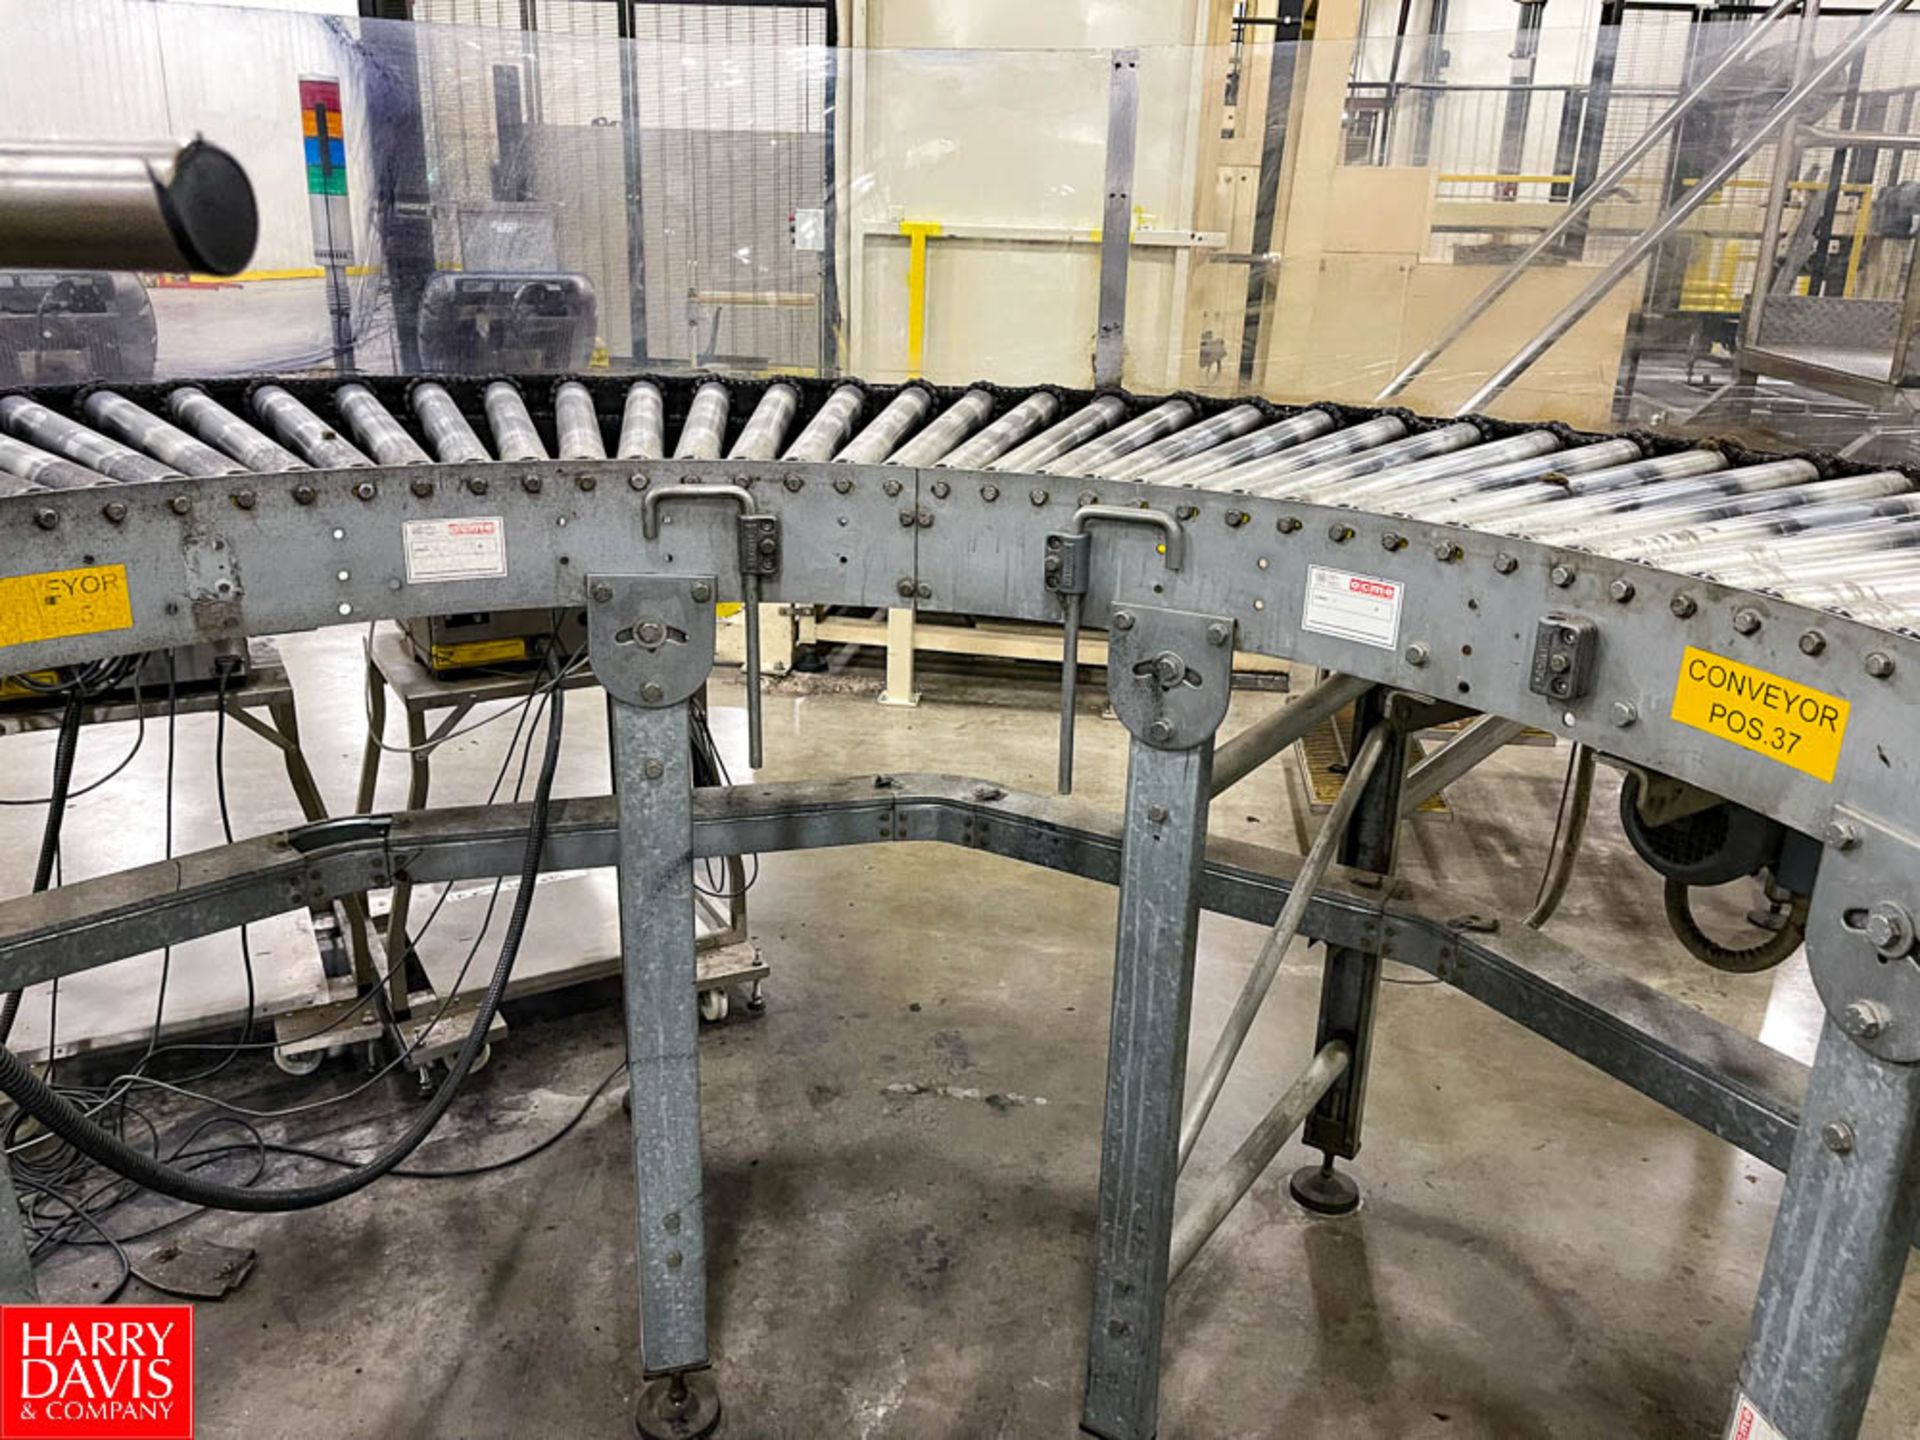 180 Degree Power Roller Conveyor section with Belt Conveyor with Over 60' Power Roller Conveyor up - Image 2 of 2